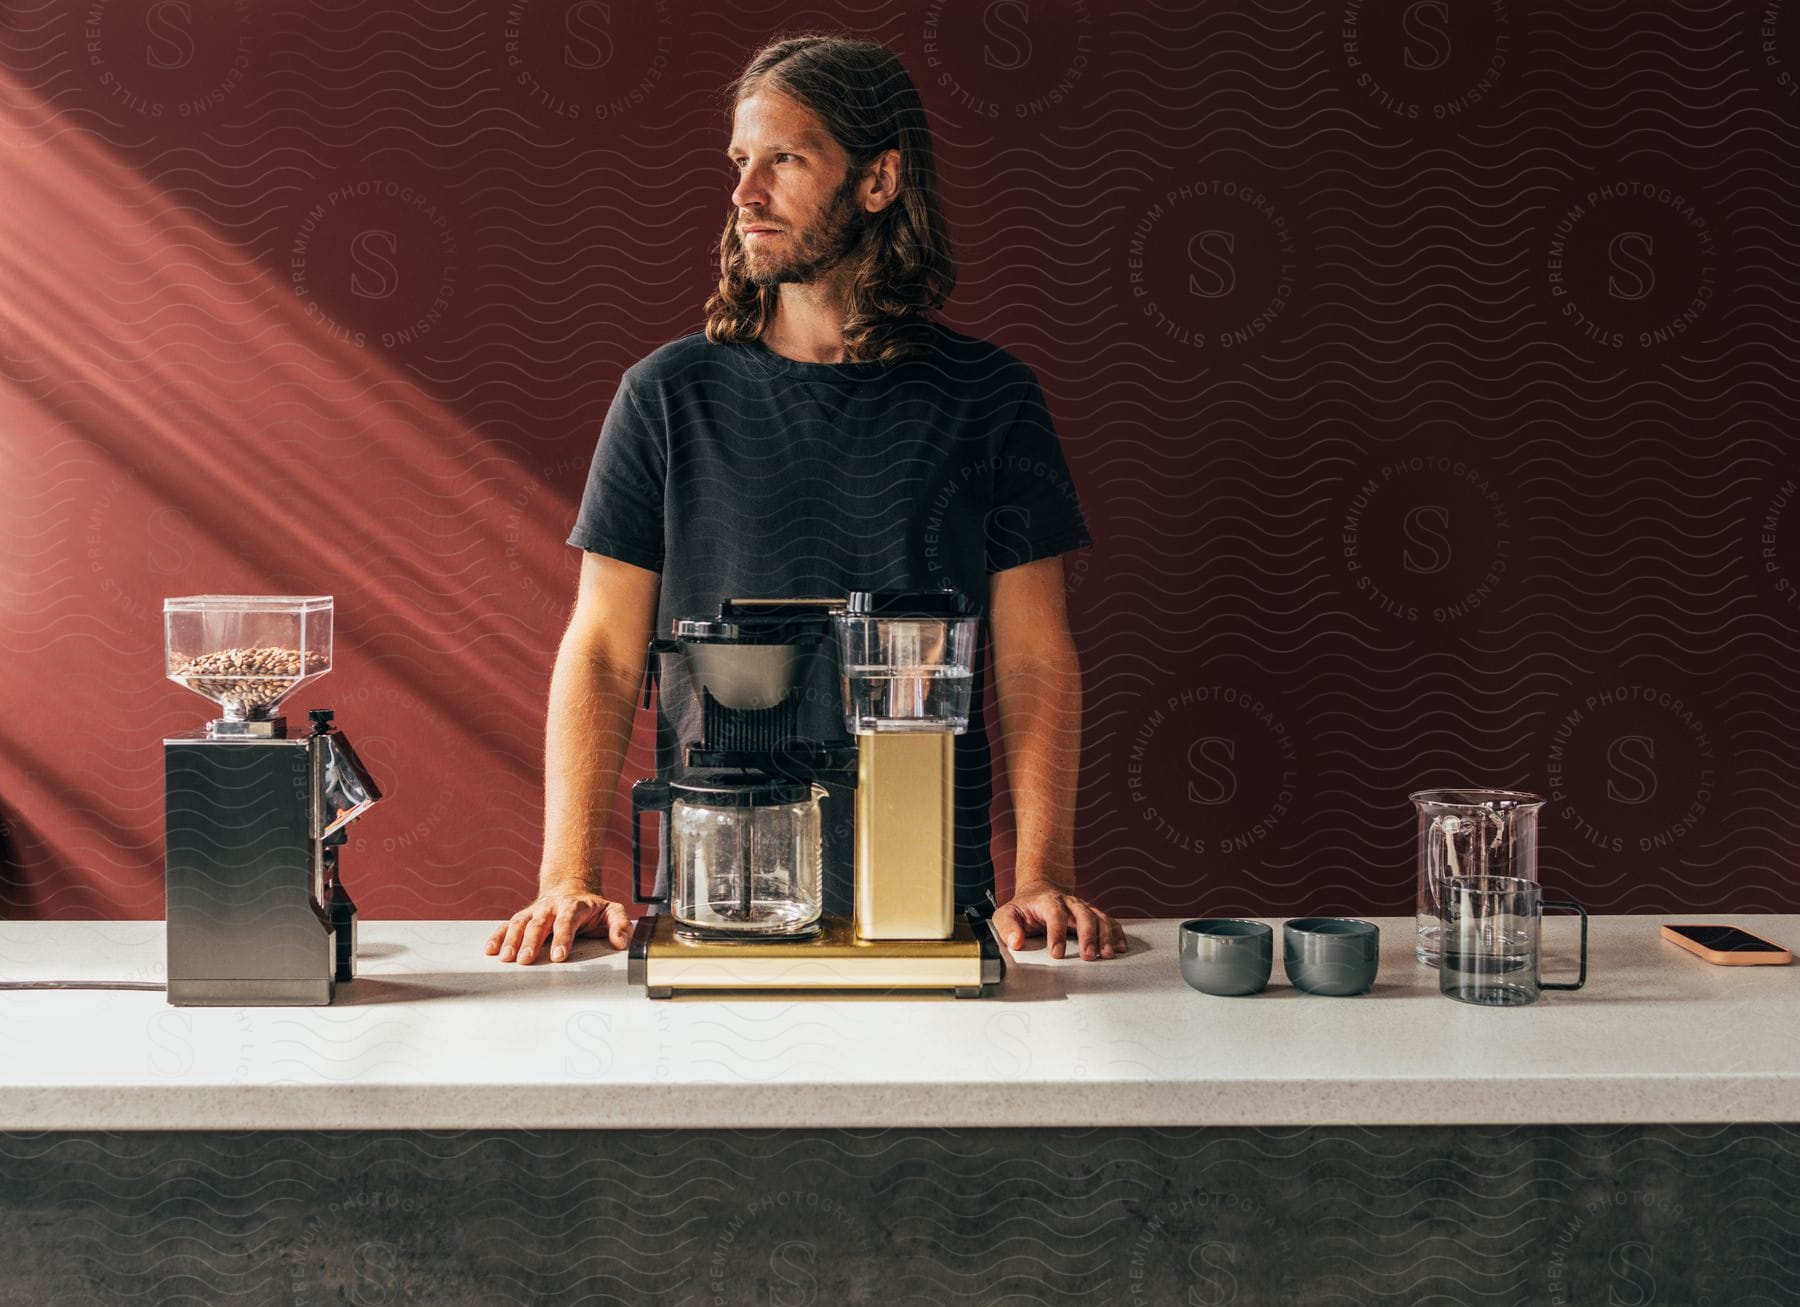 A bearded man with long hair, dressed in a black t-shirt, stands behind a counter with a coffee machine.